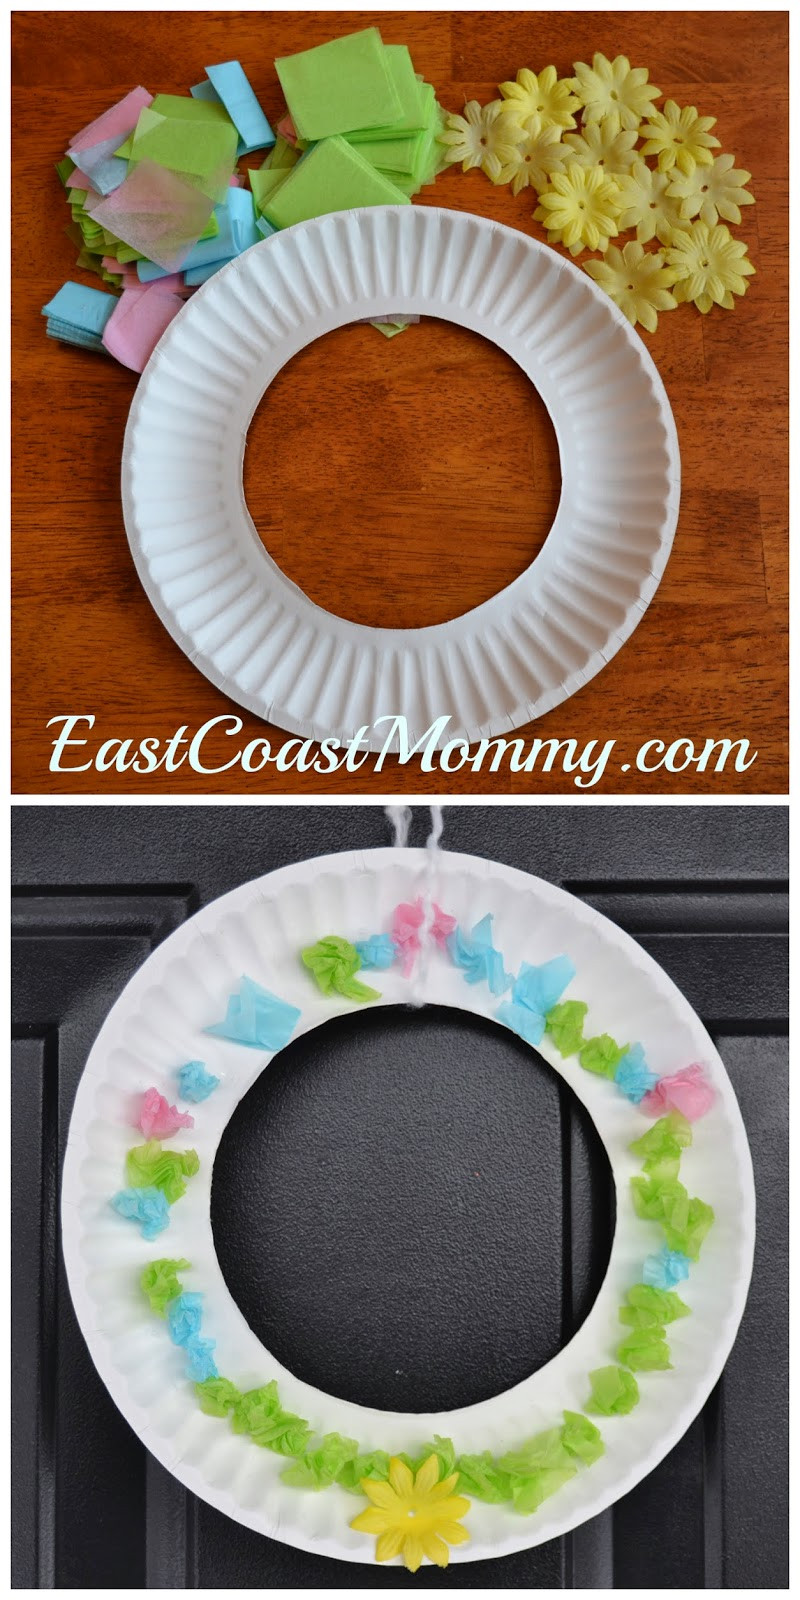 Spring Craft For Preschoolers
 East Coast Mommy Spring Craft for Preschoolers